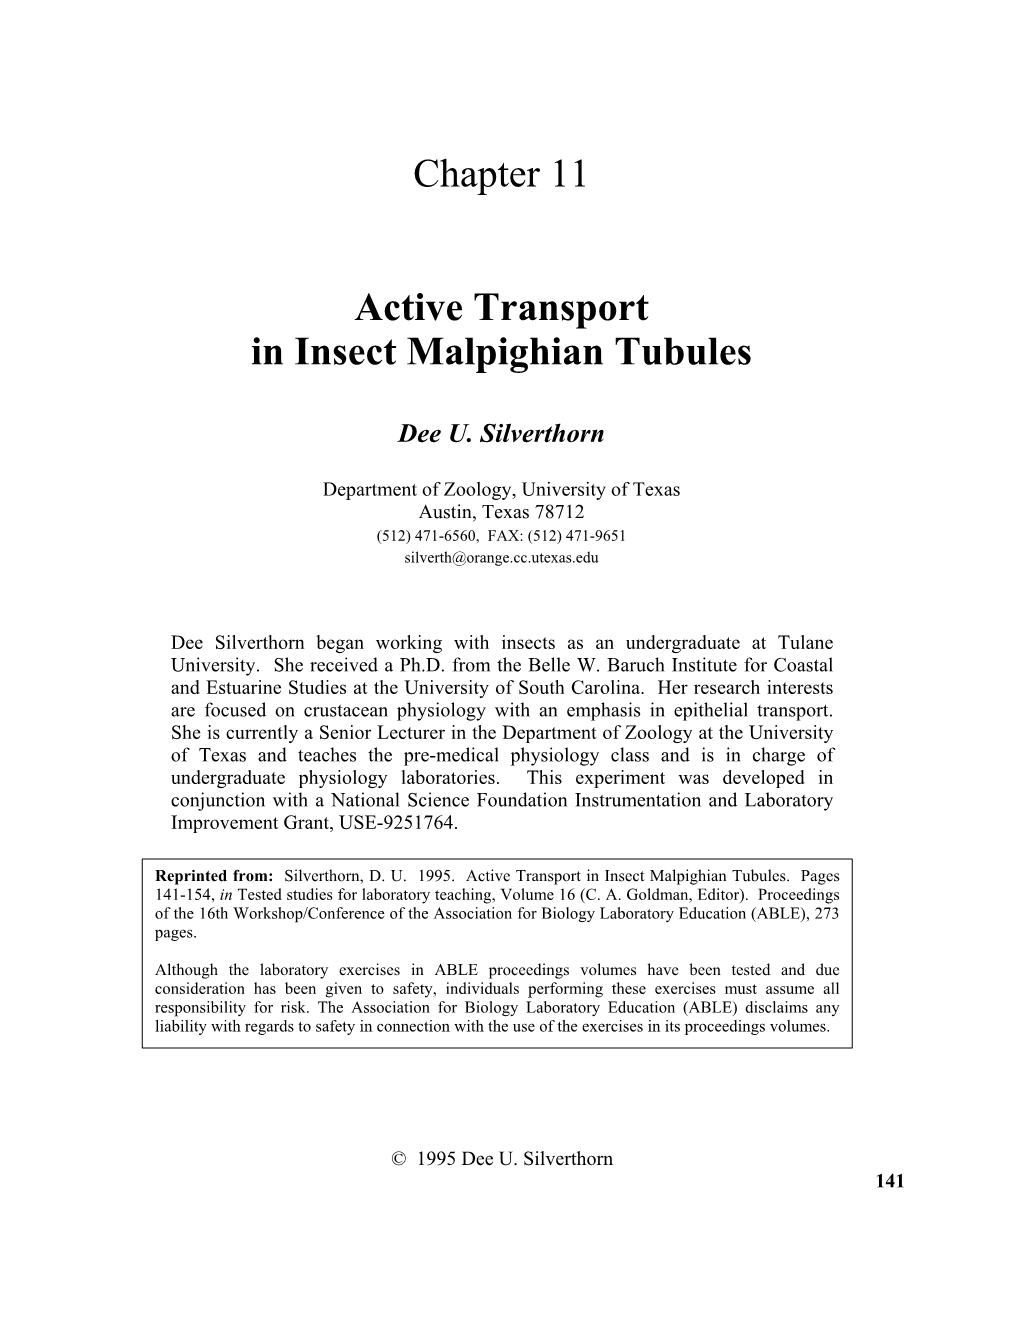 Chapter 11 Active Transport in Insect Malpighian Tubules